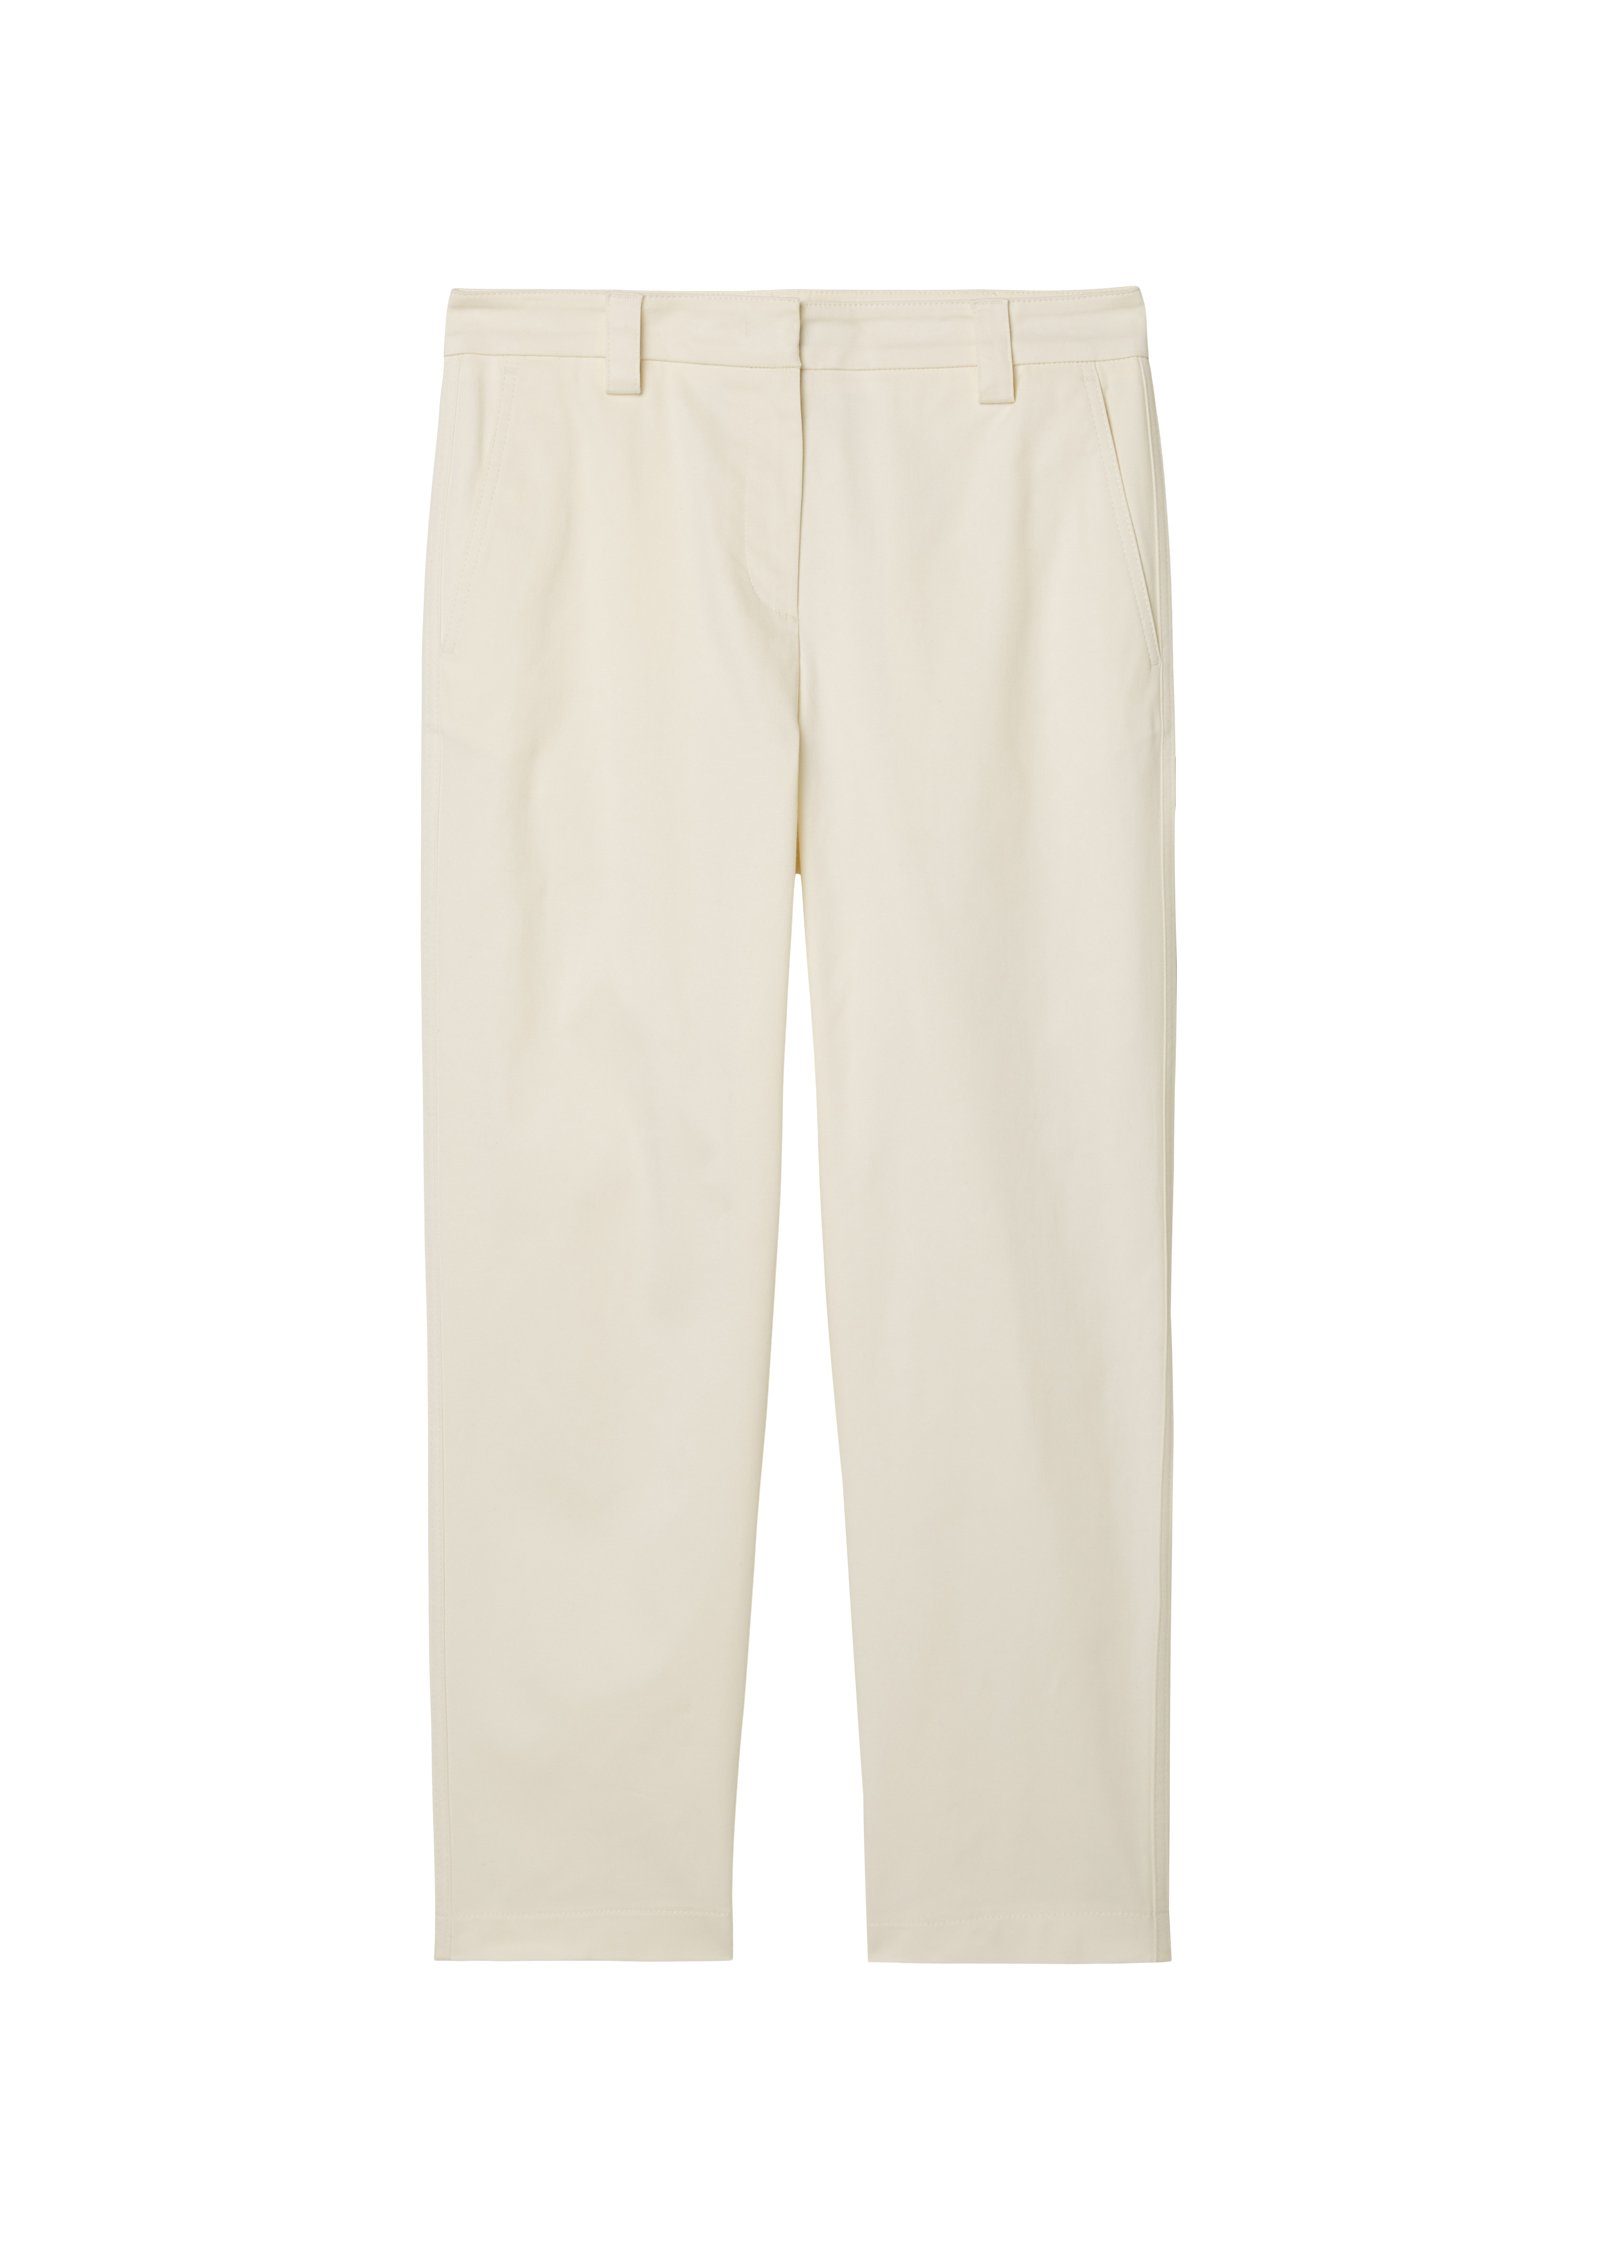 Marc tapered chalky 7/8-Hose im welt style, pocket high modern rise, chino O'Polo leg, Chino-Style modernen Pants, sand